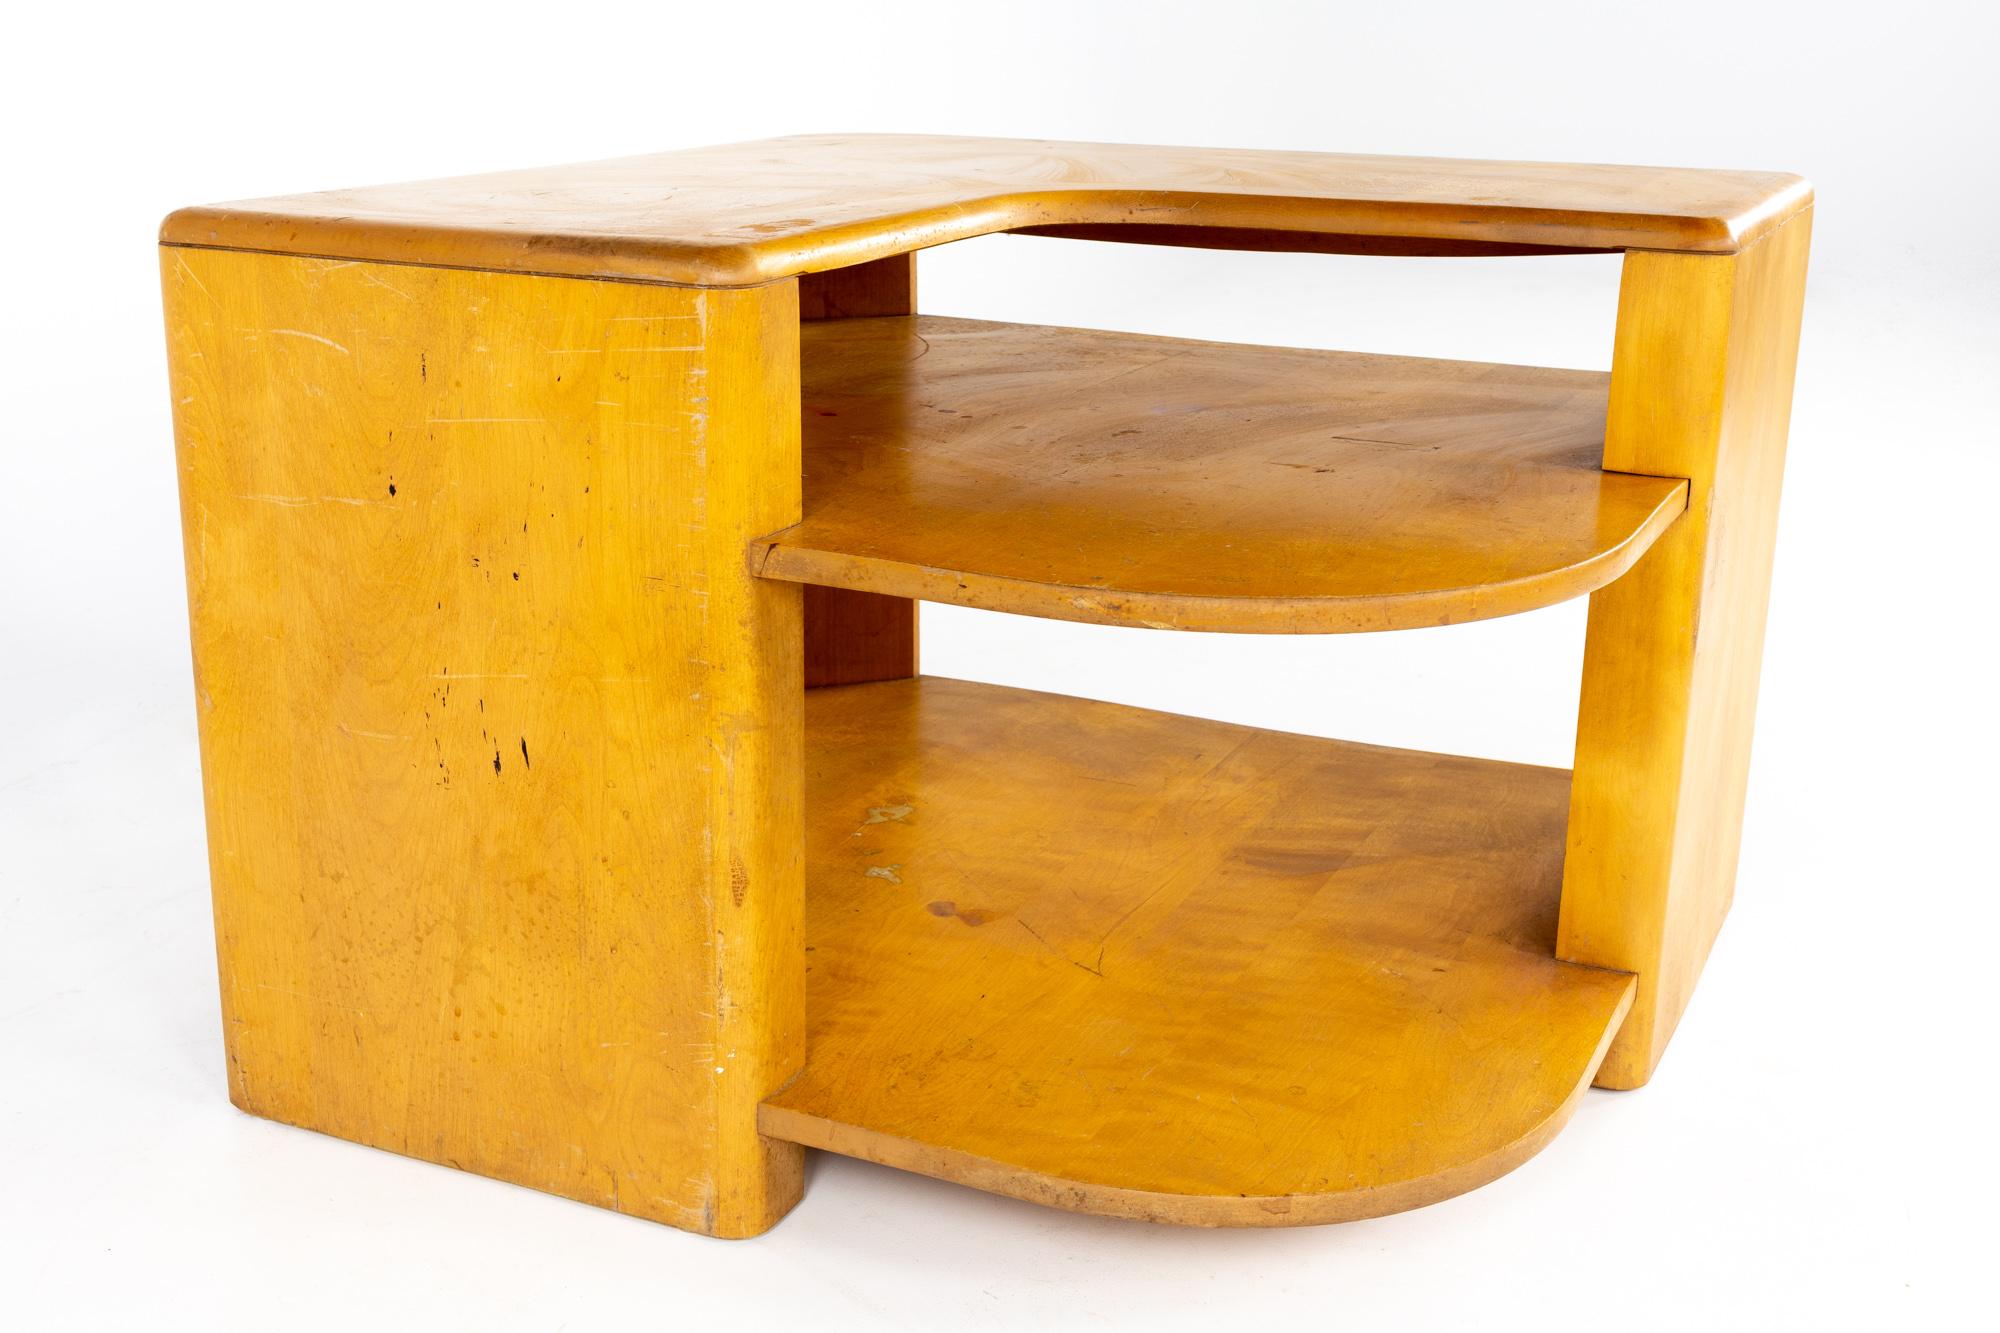 Heywood Wakefield mid century wheat 3 tier corner table.

This table measures: 32 wide x 32 deep x 22.5 inches high.

All pieces of furniture can be had in what we call restored vintage condition. That means the piece is restored upon purchase